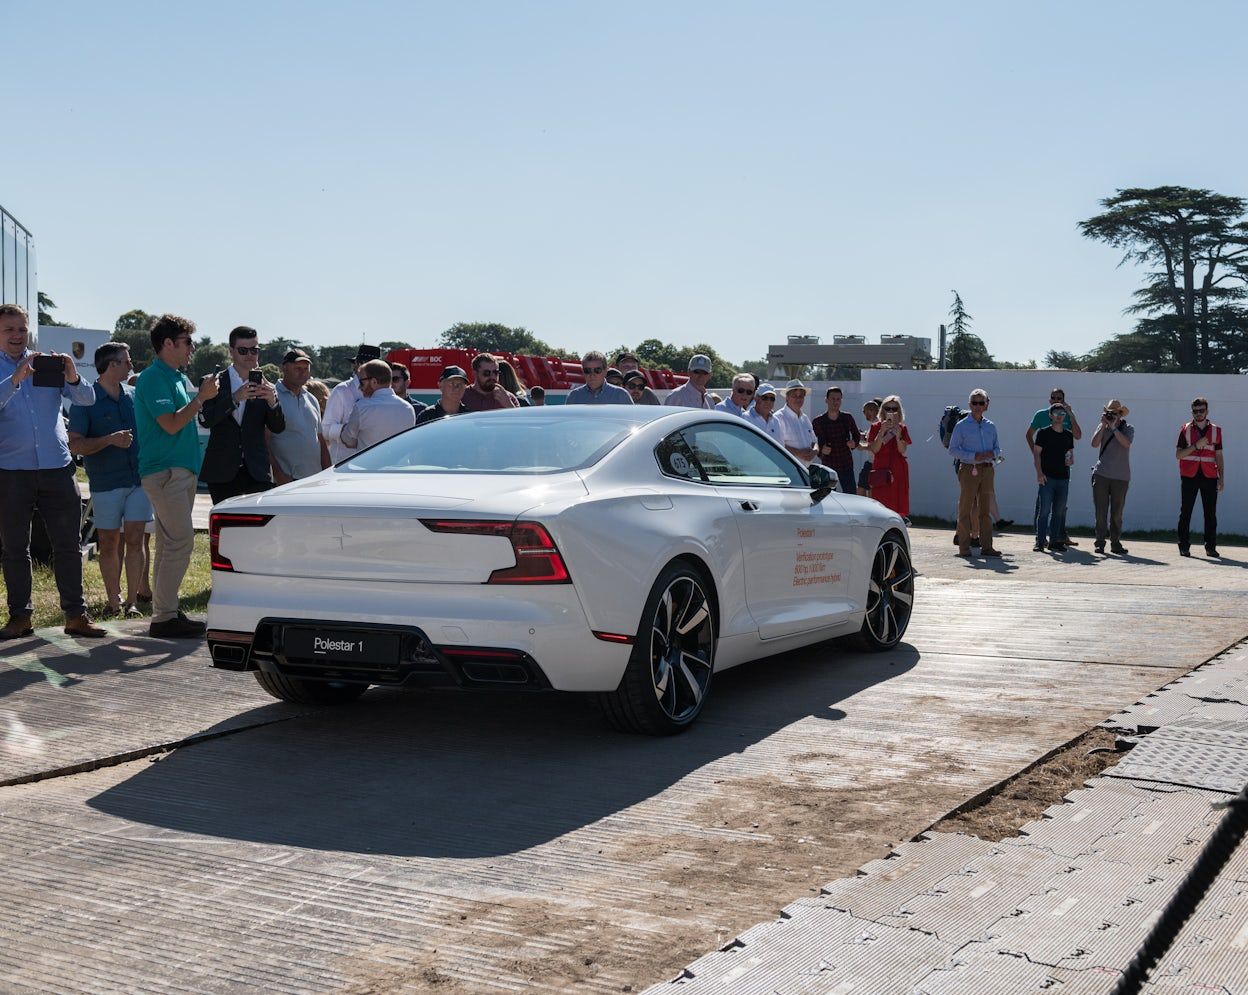 Crowd of spectators taking photos of a white Polestar 1 in a outdoor car show area